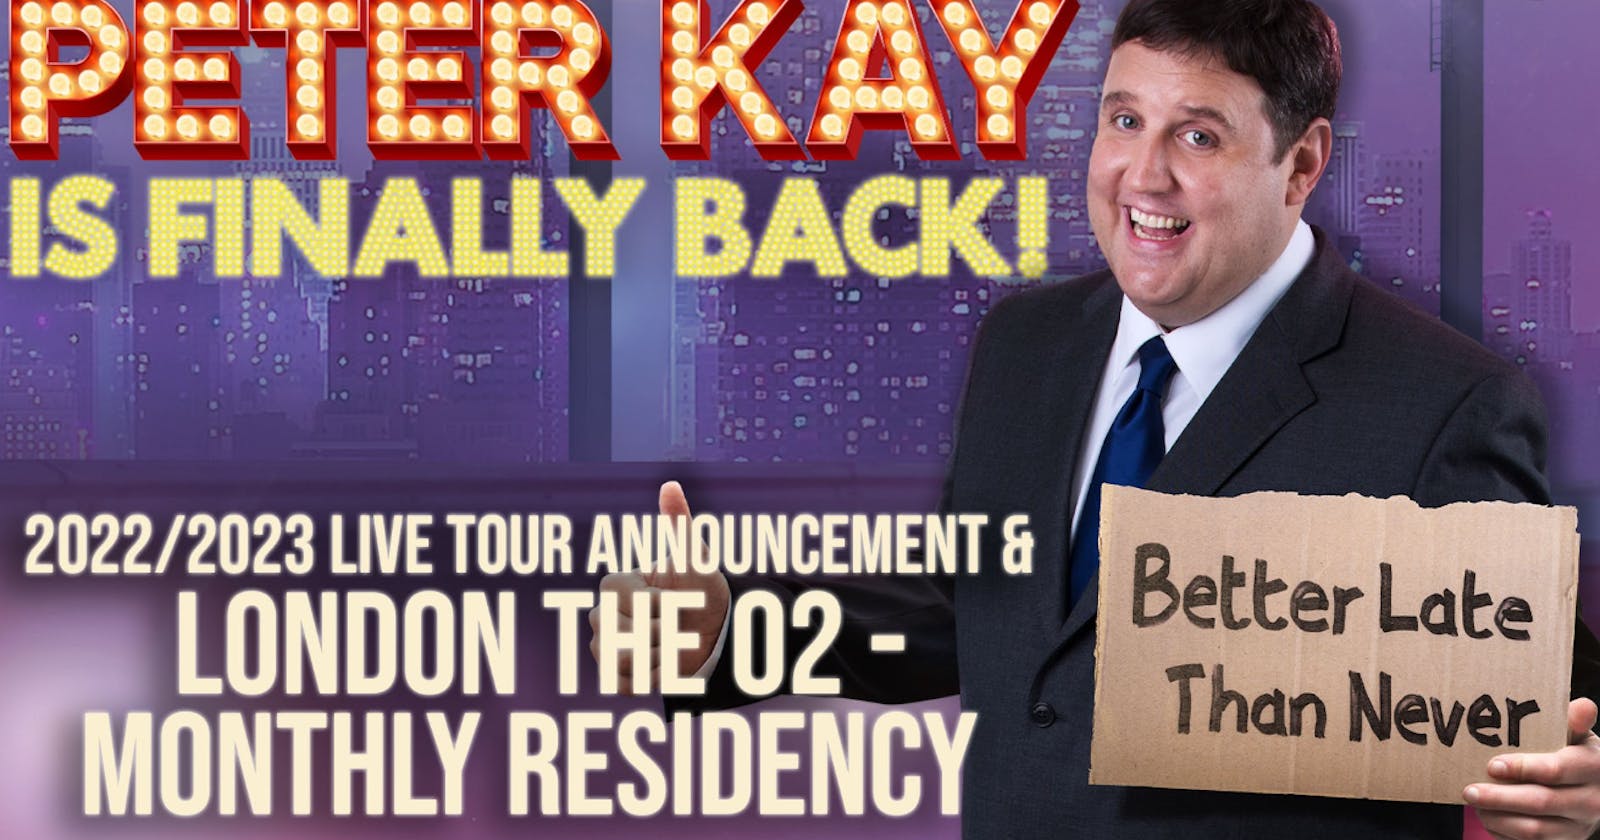 Peter Kay adds tour date tickets due to soaring demand